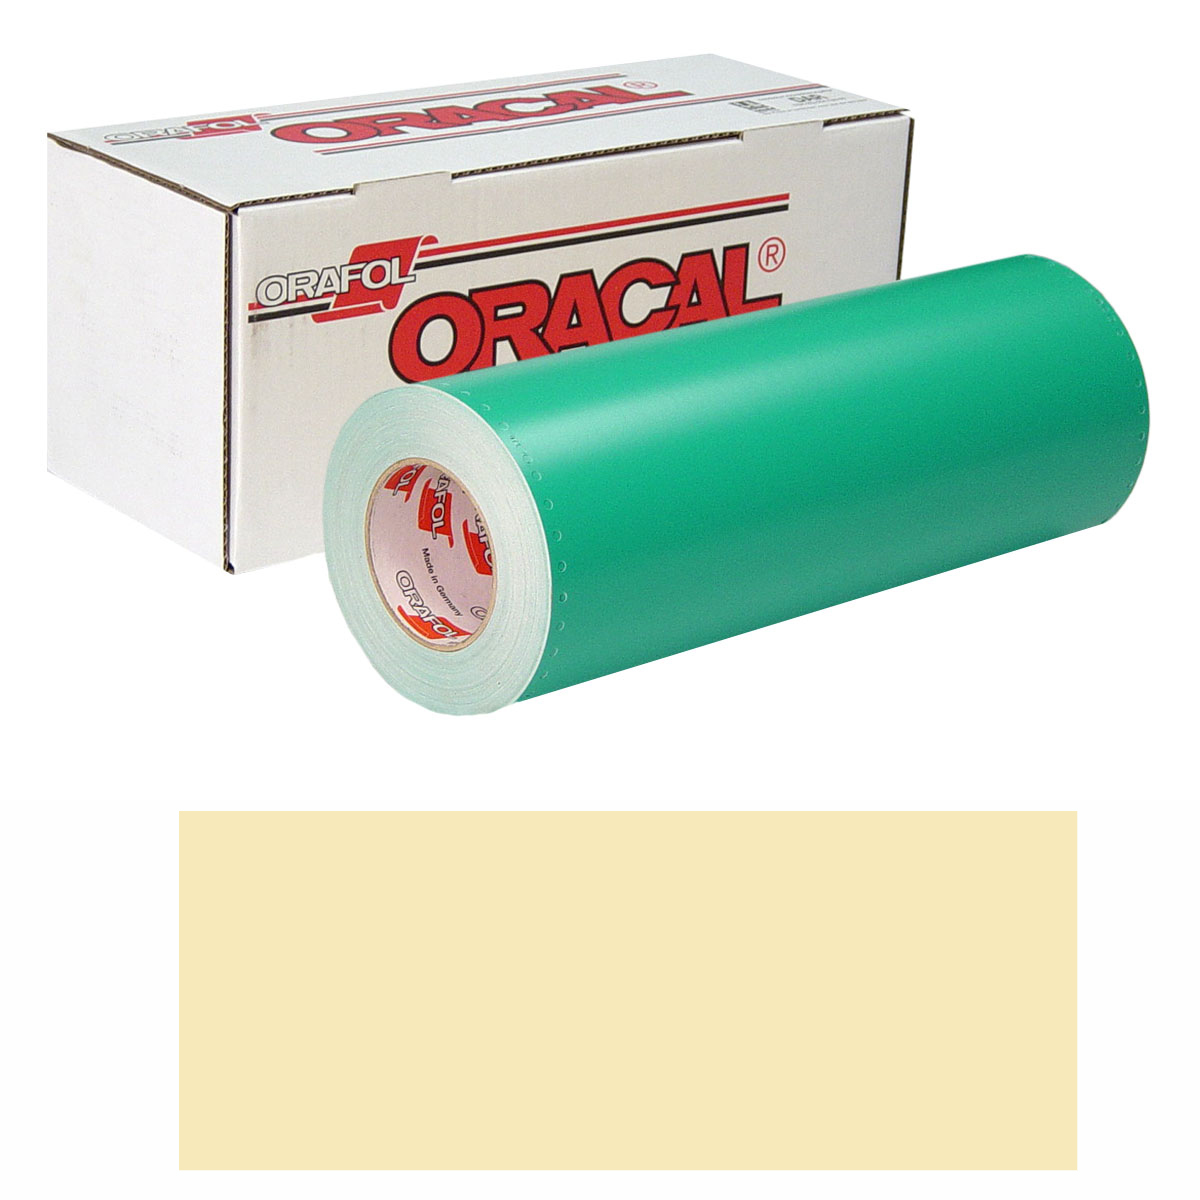 ORACAL 8500 30in X 10yd 805 Ivory